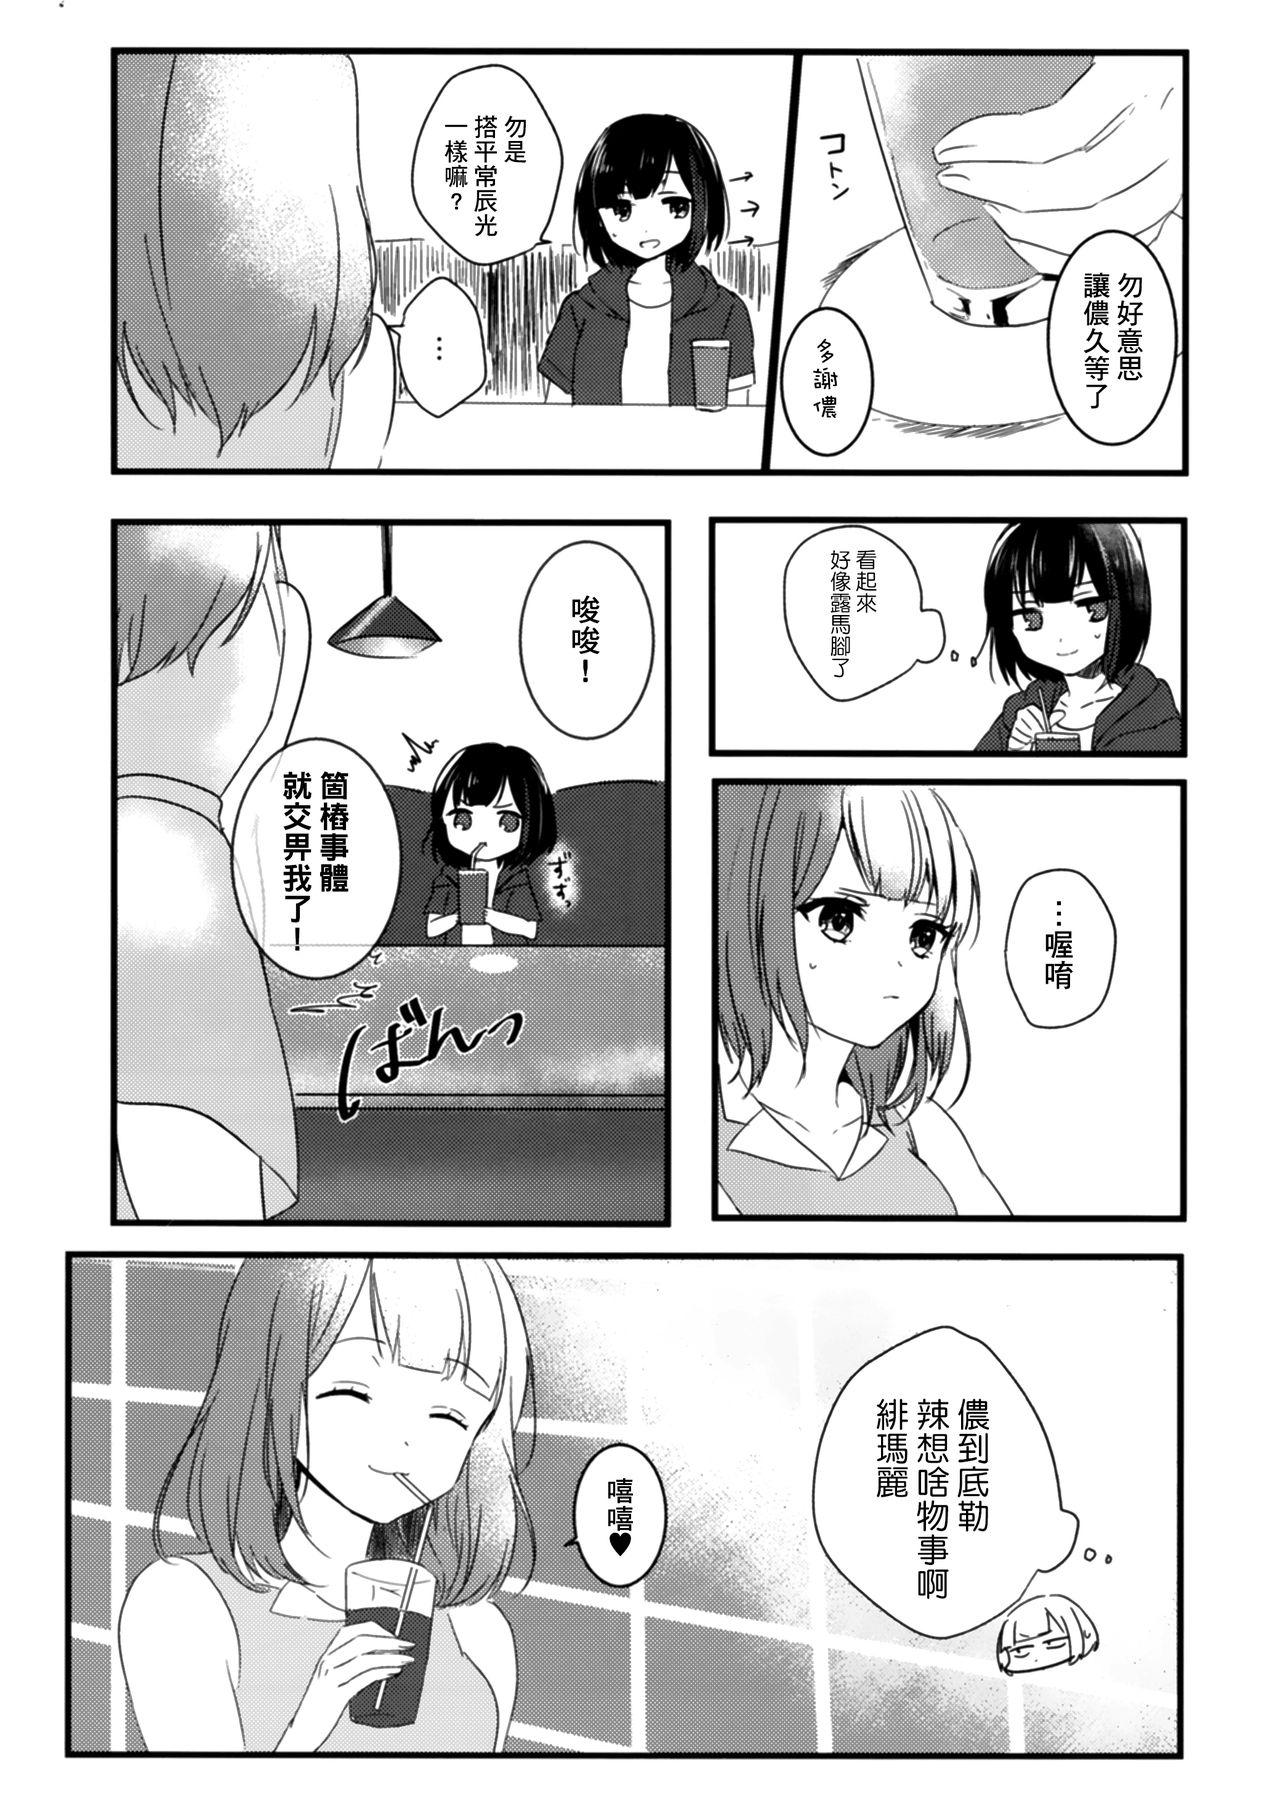 Orgy Secret relationship - Bang dream Two - Page 8